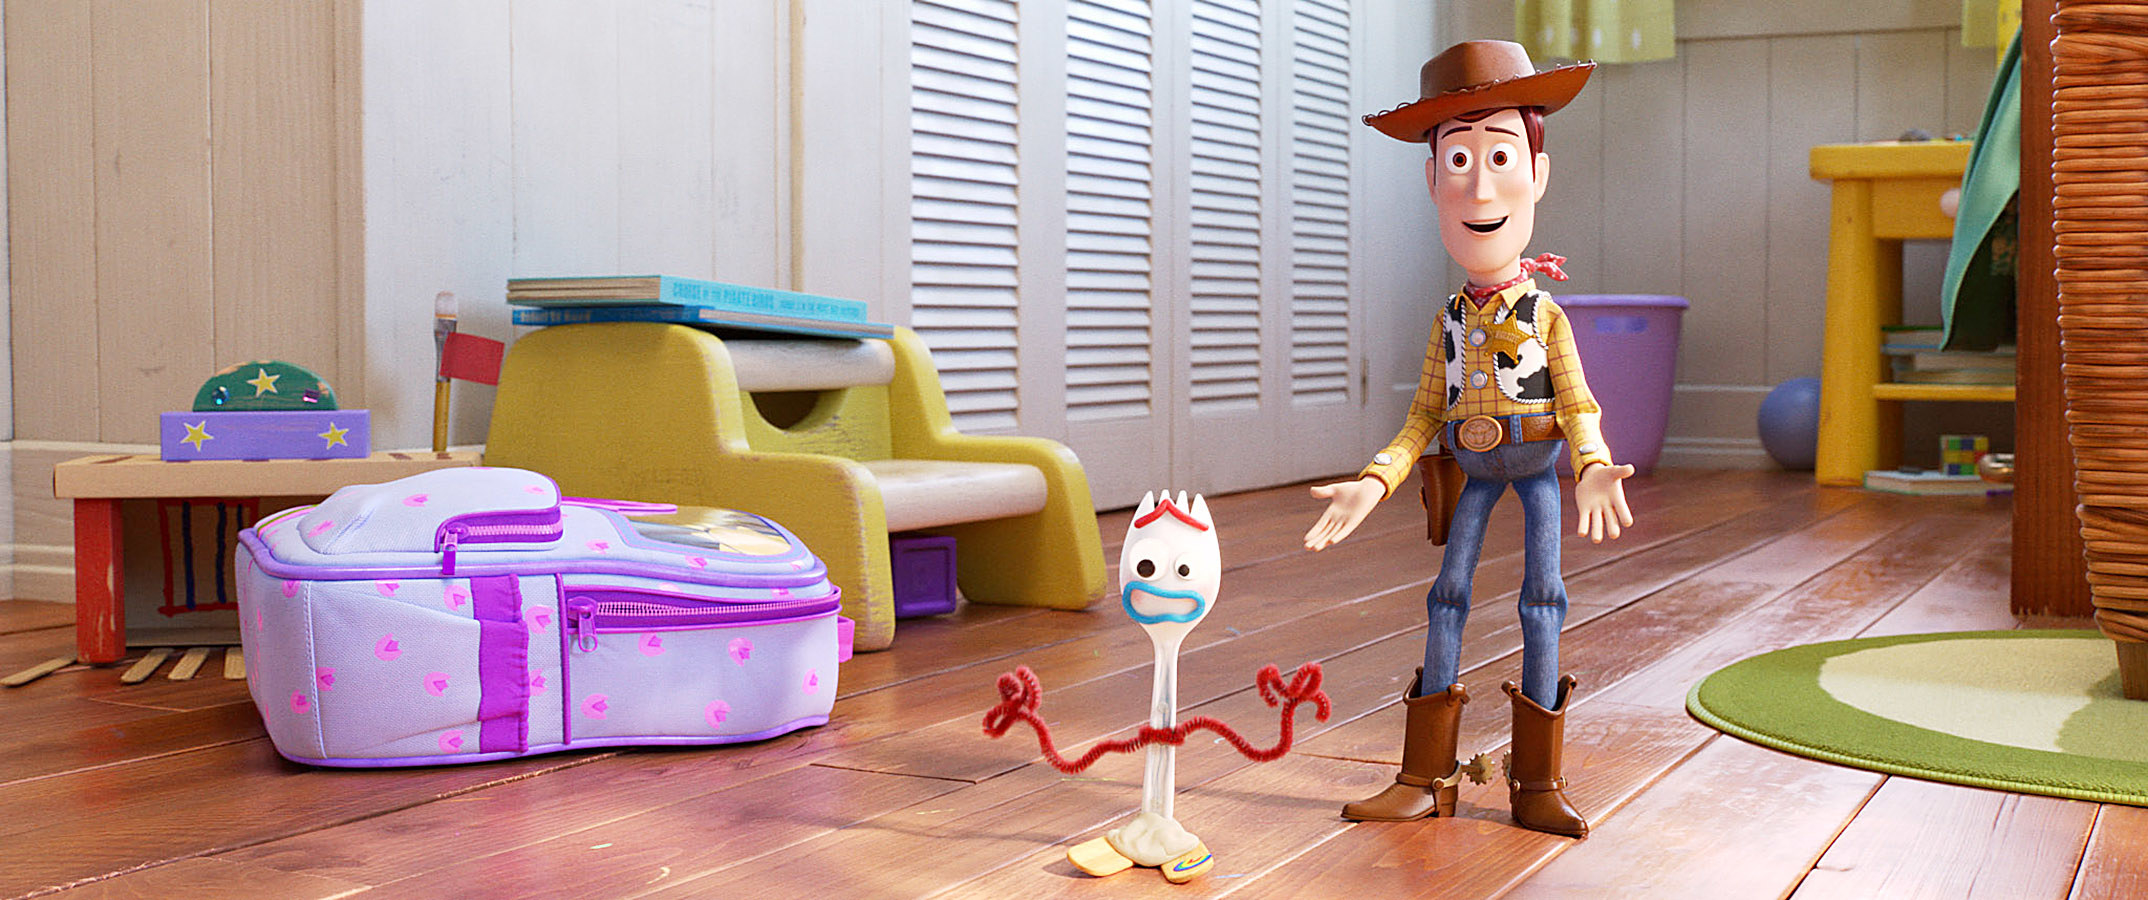 Forky next to Woody